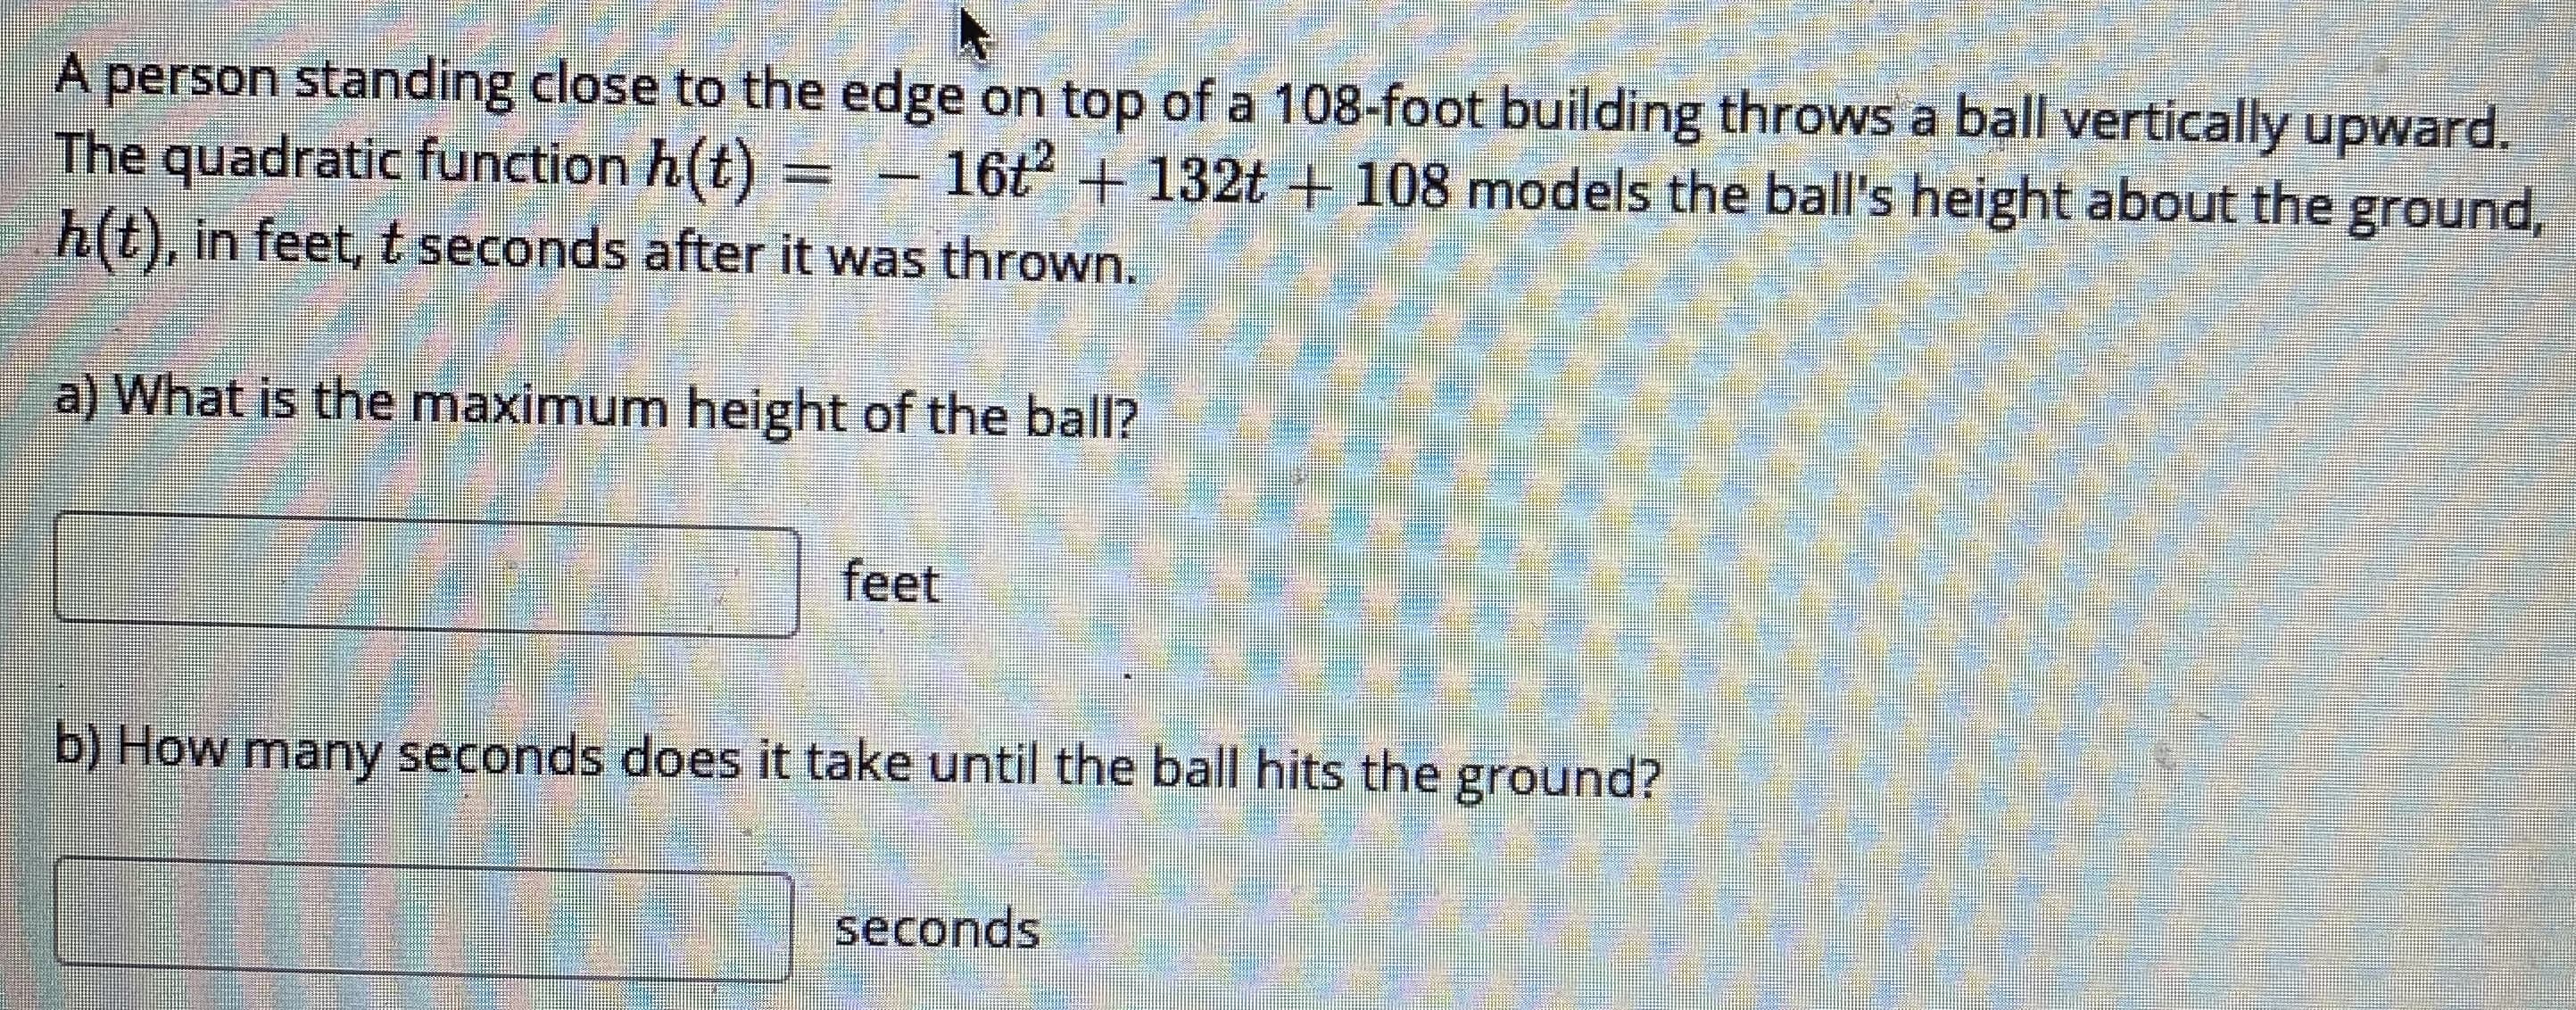 A person standing close to the edge on top of a 108-foot building throws a ball vertically upward.
The quadratic function h(t) =
h(t), in feet, t seconds after it was thrown.
- 16t + 132t+ 108 models the ball's height about the ground,
a) What is the maximum height of the ball?
feet
b) How many seconds does it take until the ball hits the ground?
भ
seconds
